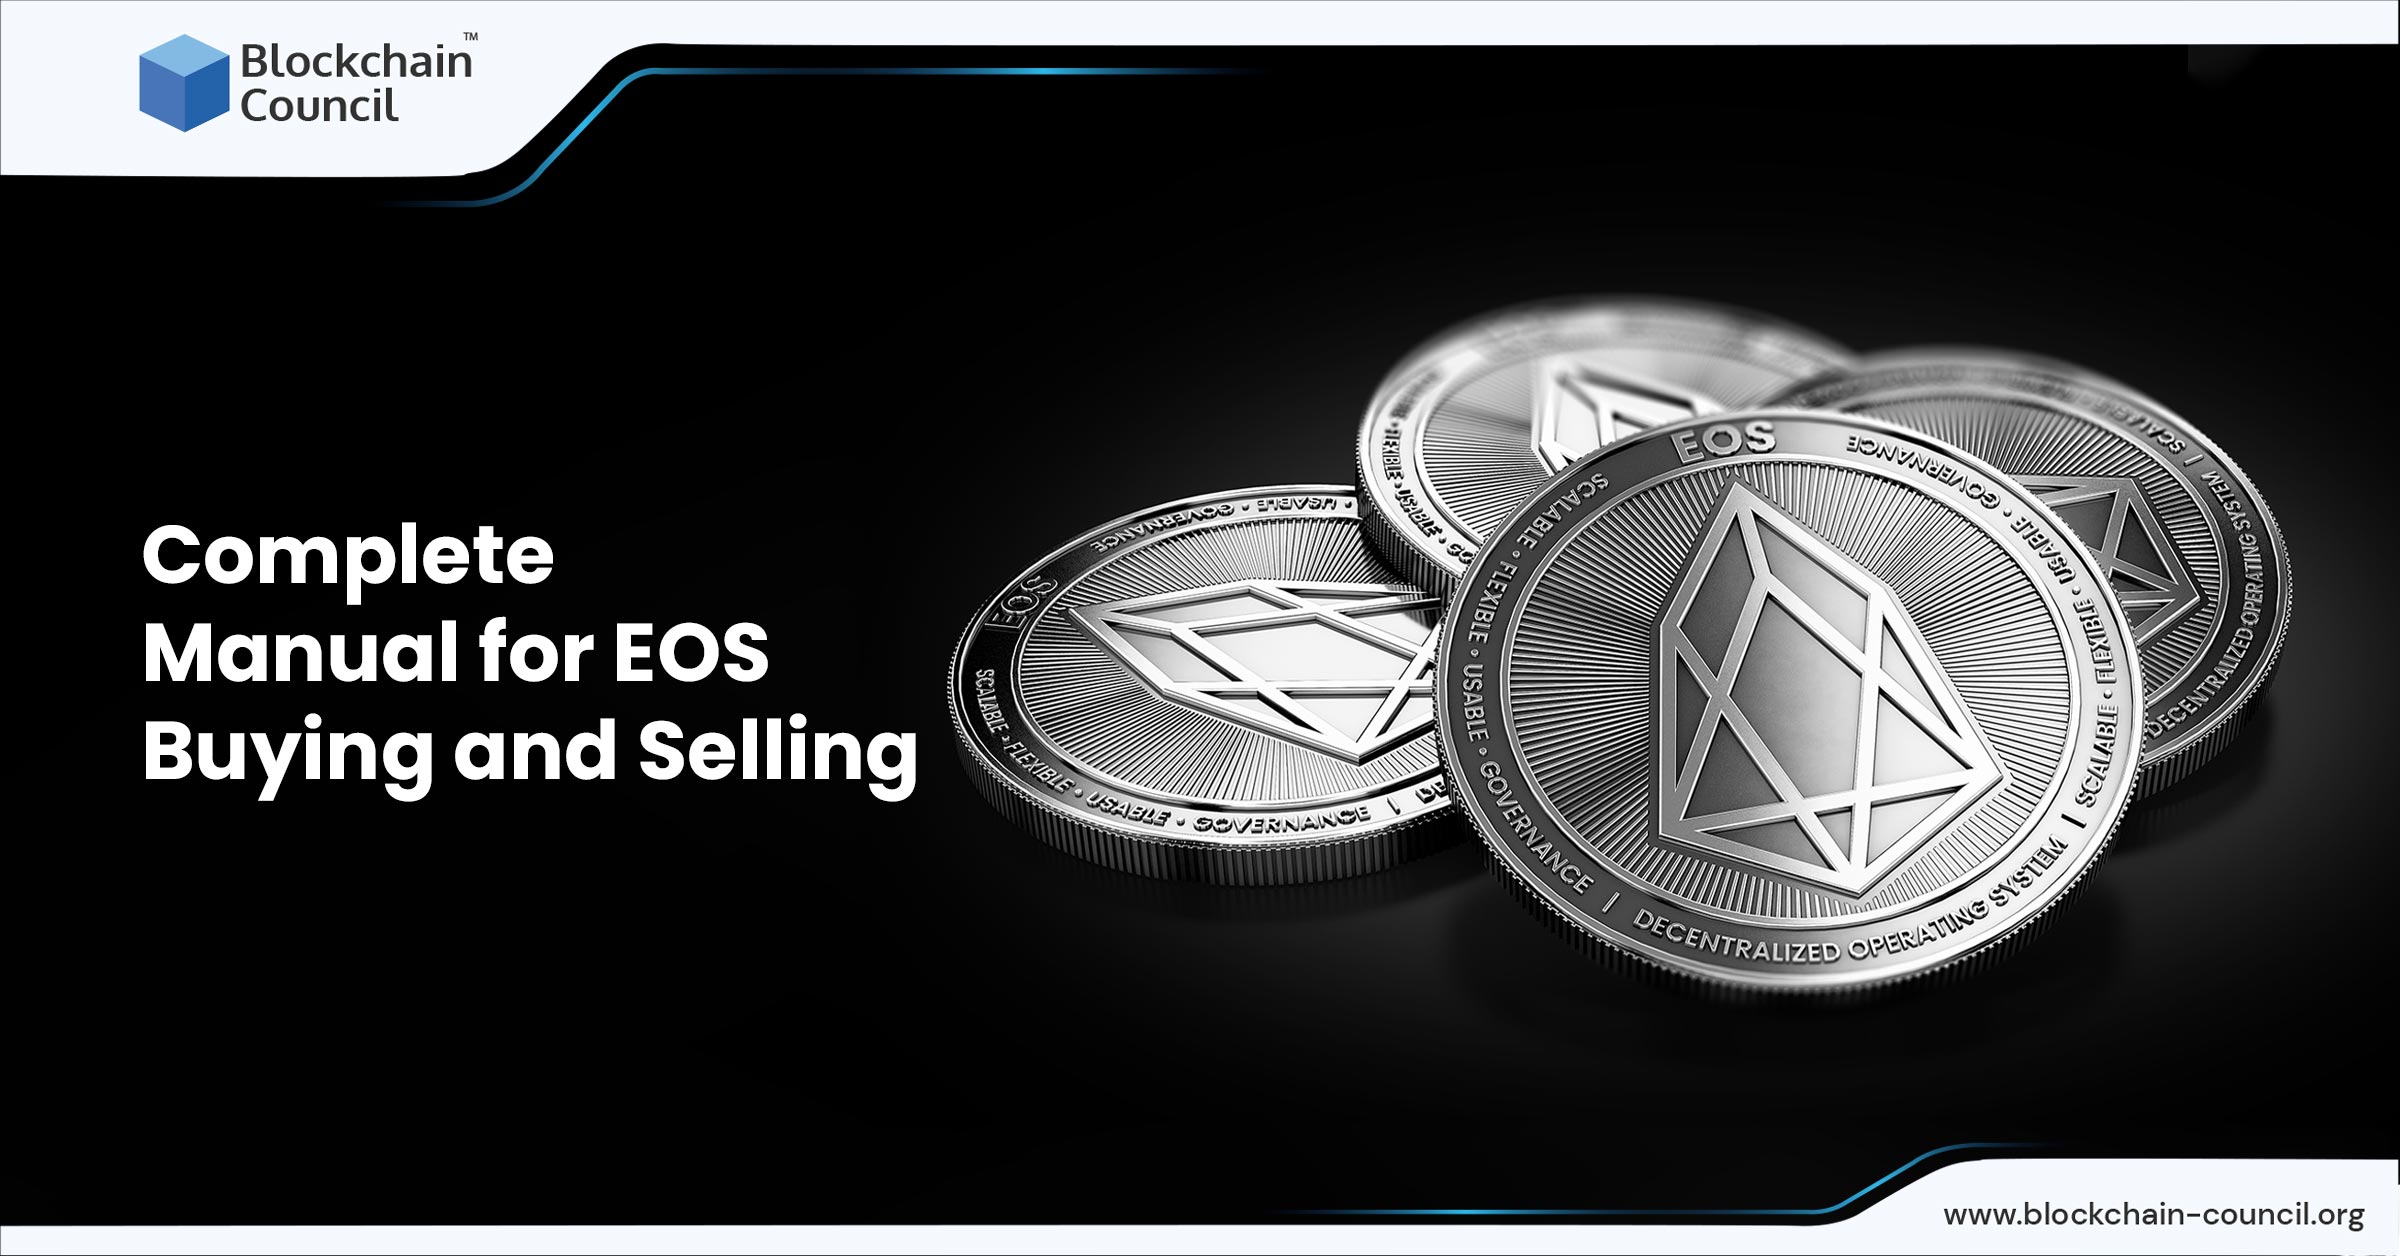 Complete Manual for EOS Buying and Selling